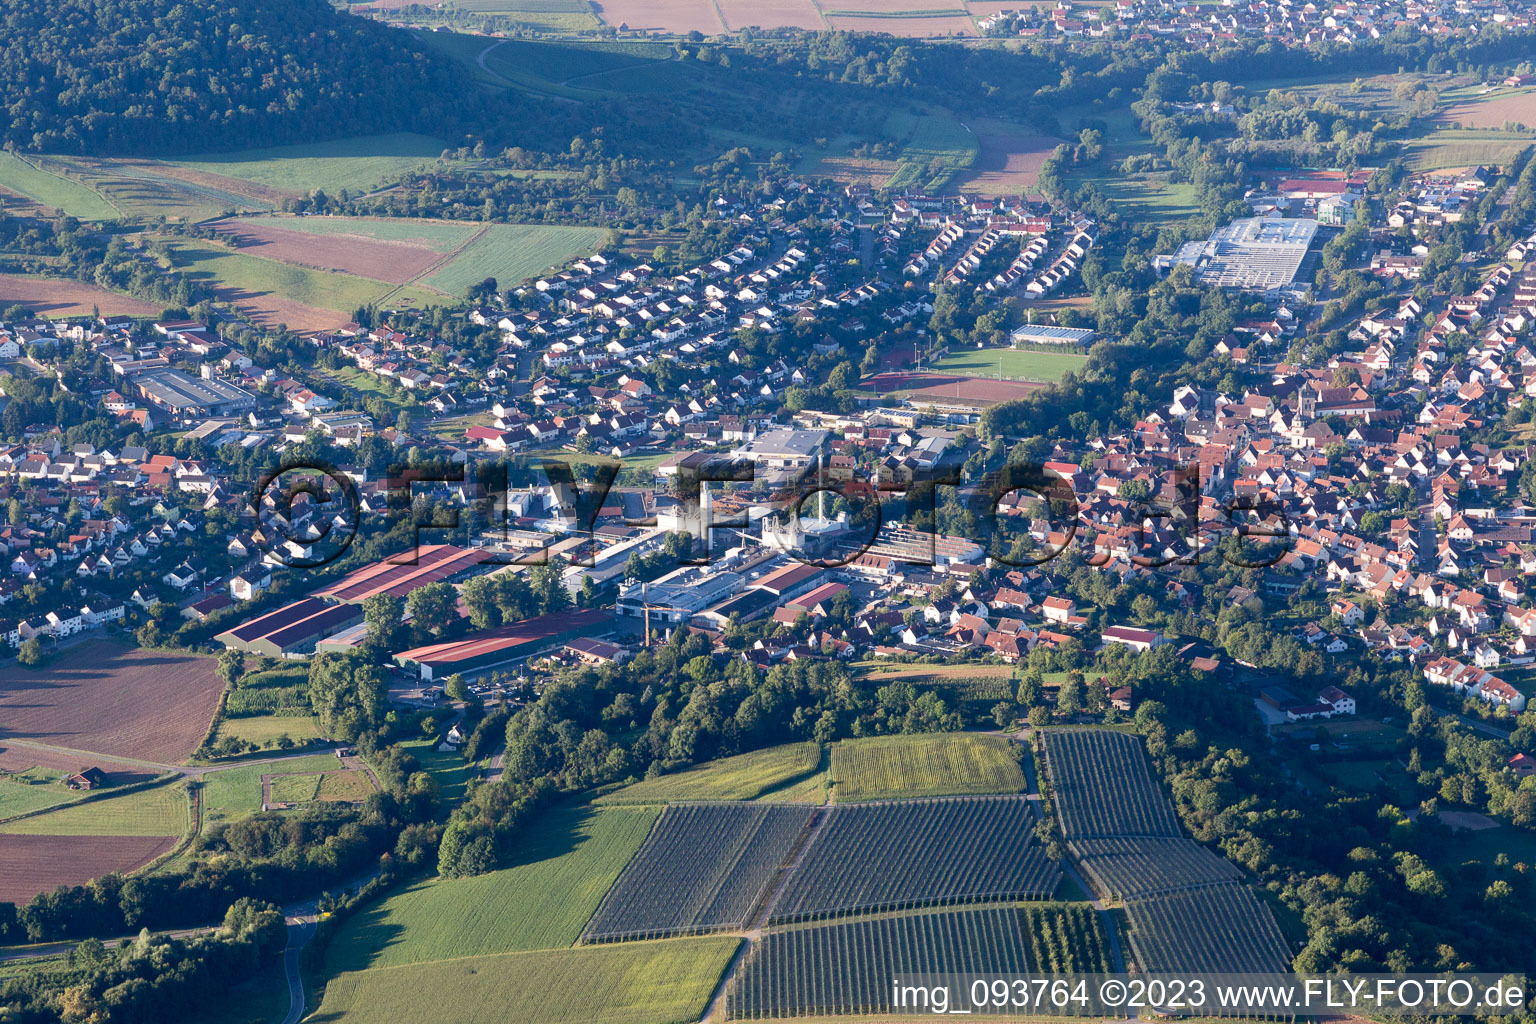 Beilstein in the state Baden-Wuerttemberg, Germany seen from above